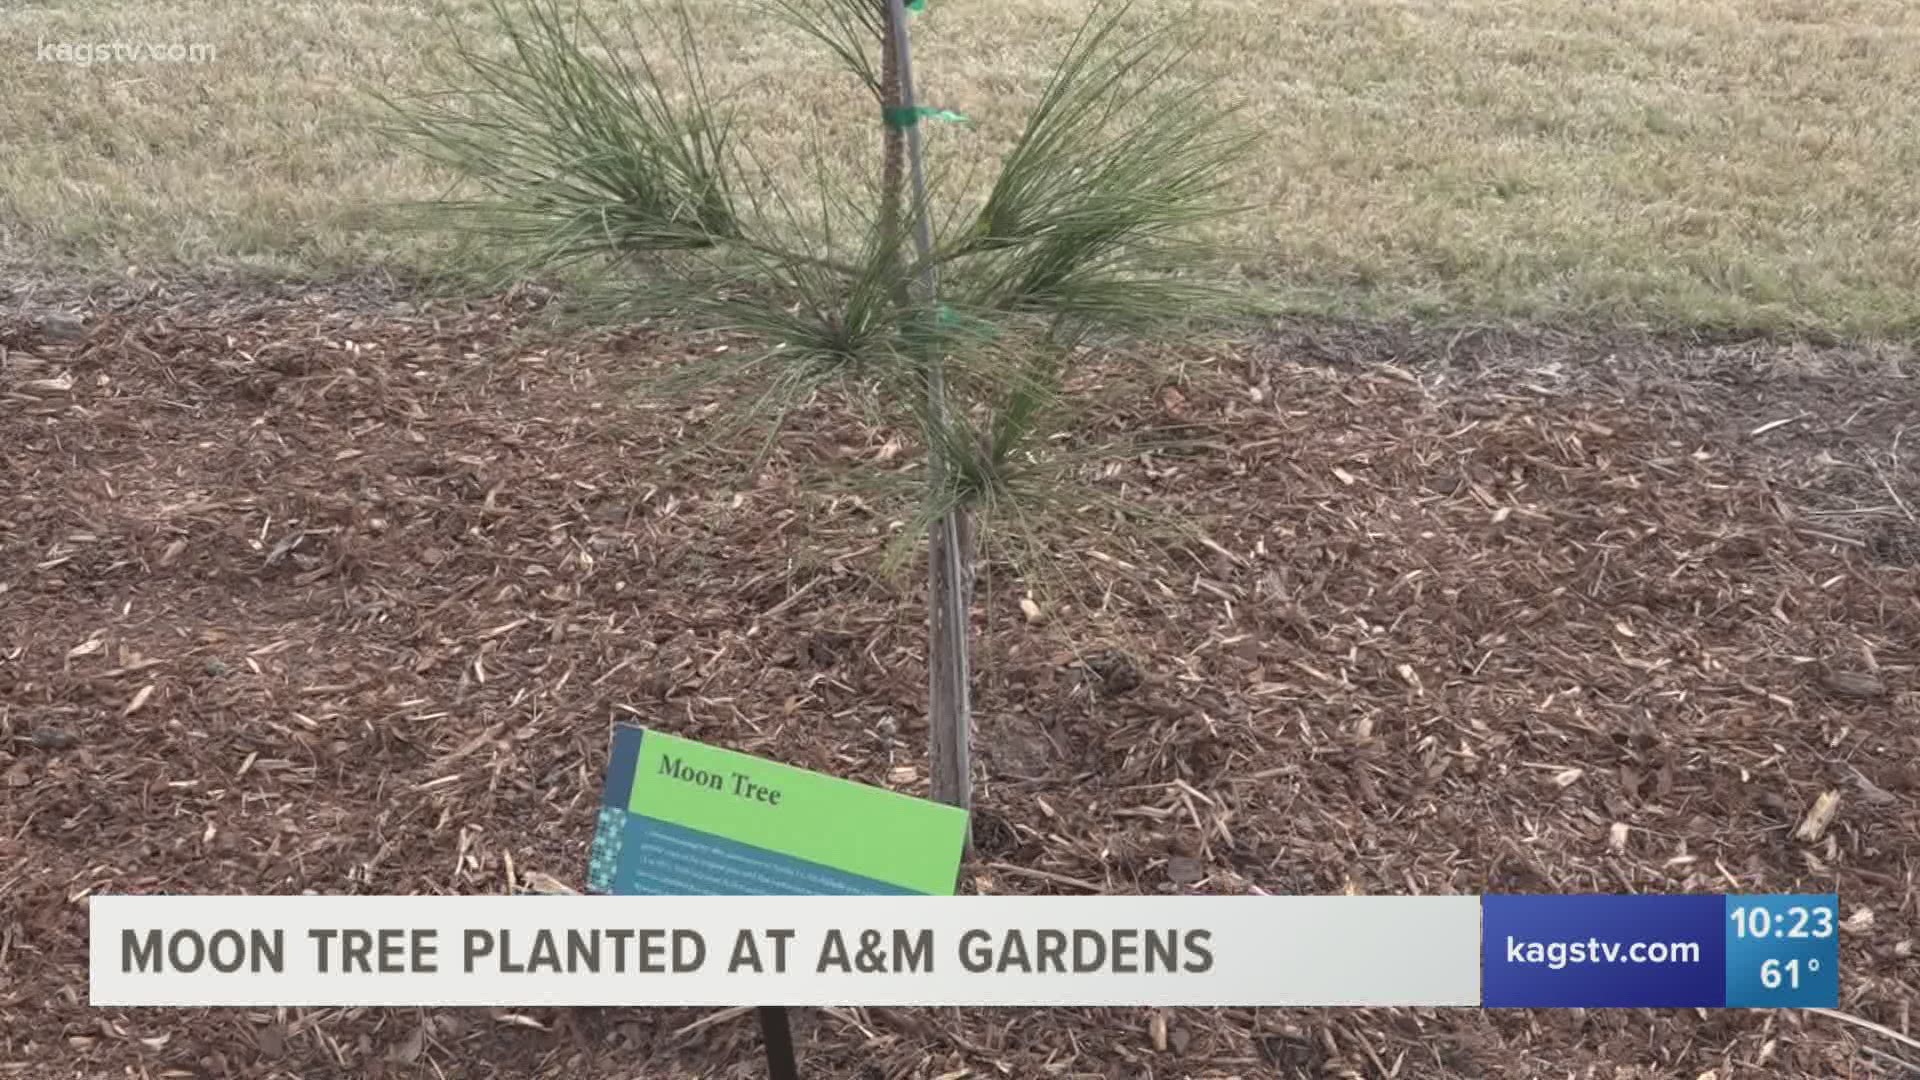 Texas A&M Forest Service has a genetic copy of an original loblolly pine moon tree whose seed journeyed to the moon and back aboard Apollo 14.